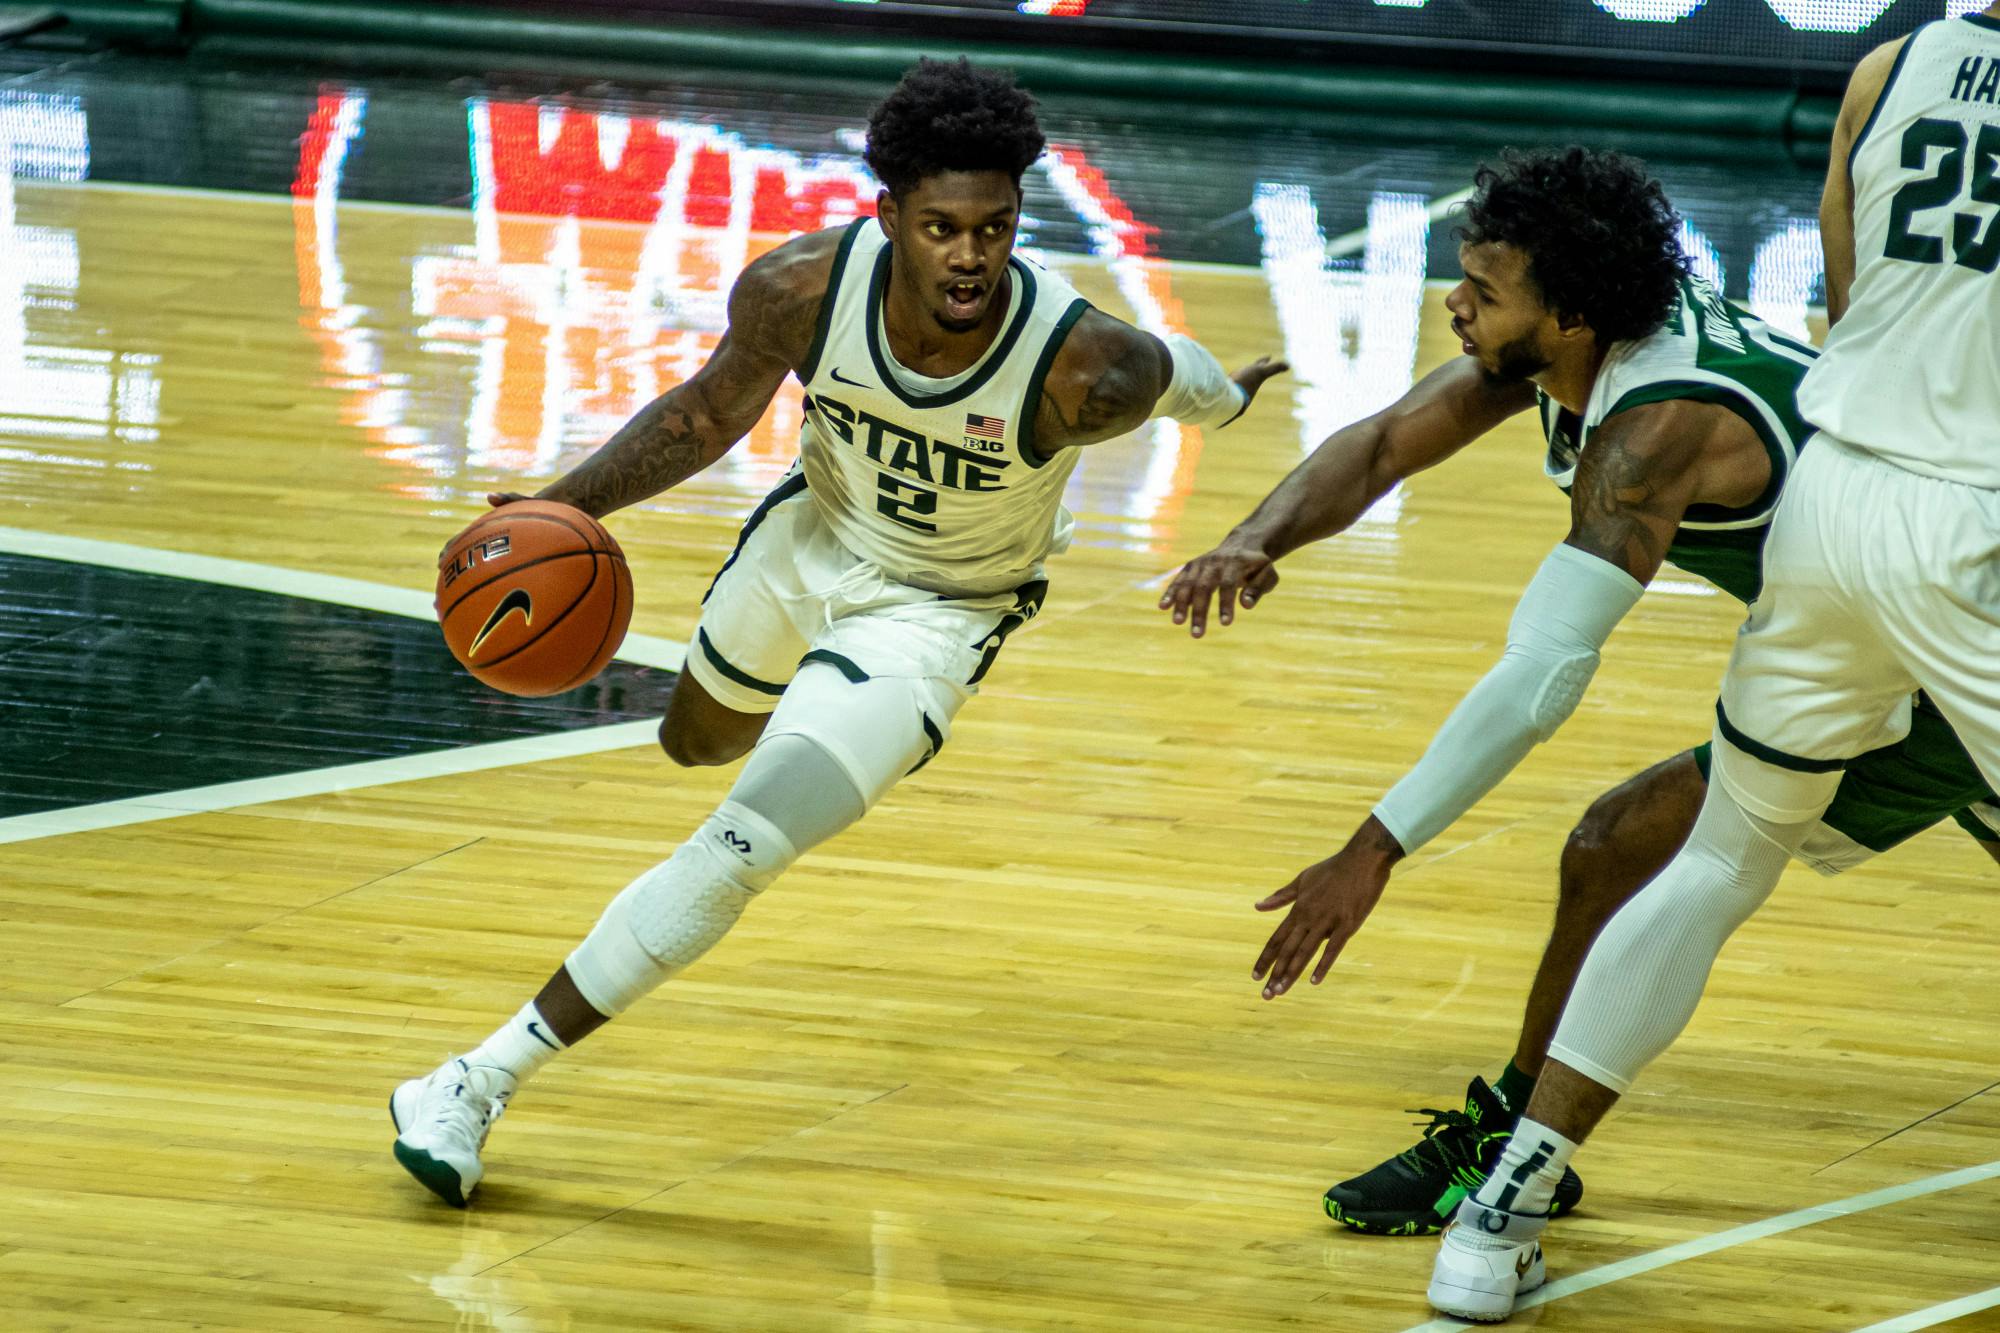 <p>Sophomore guard Rocket Watts (2) moves with the ball during the game against Eastern Michigan on Nov. 25, 2020, at the Breslin Center. The Spartans lead the Eagles 43-27 at the half.</p>